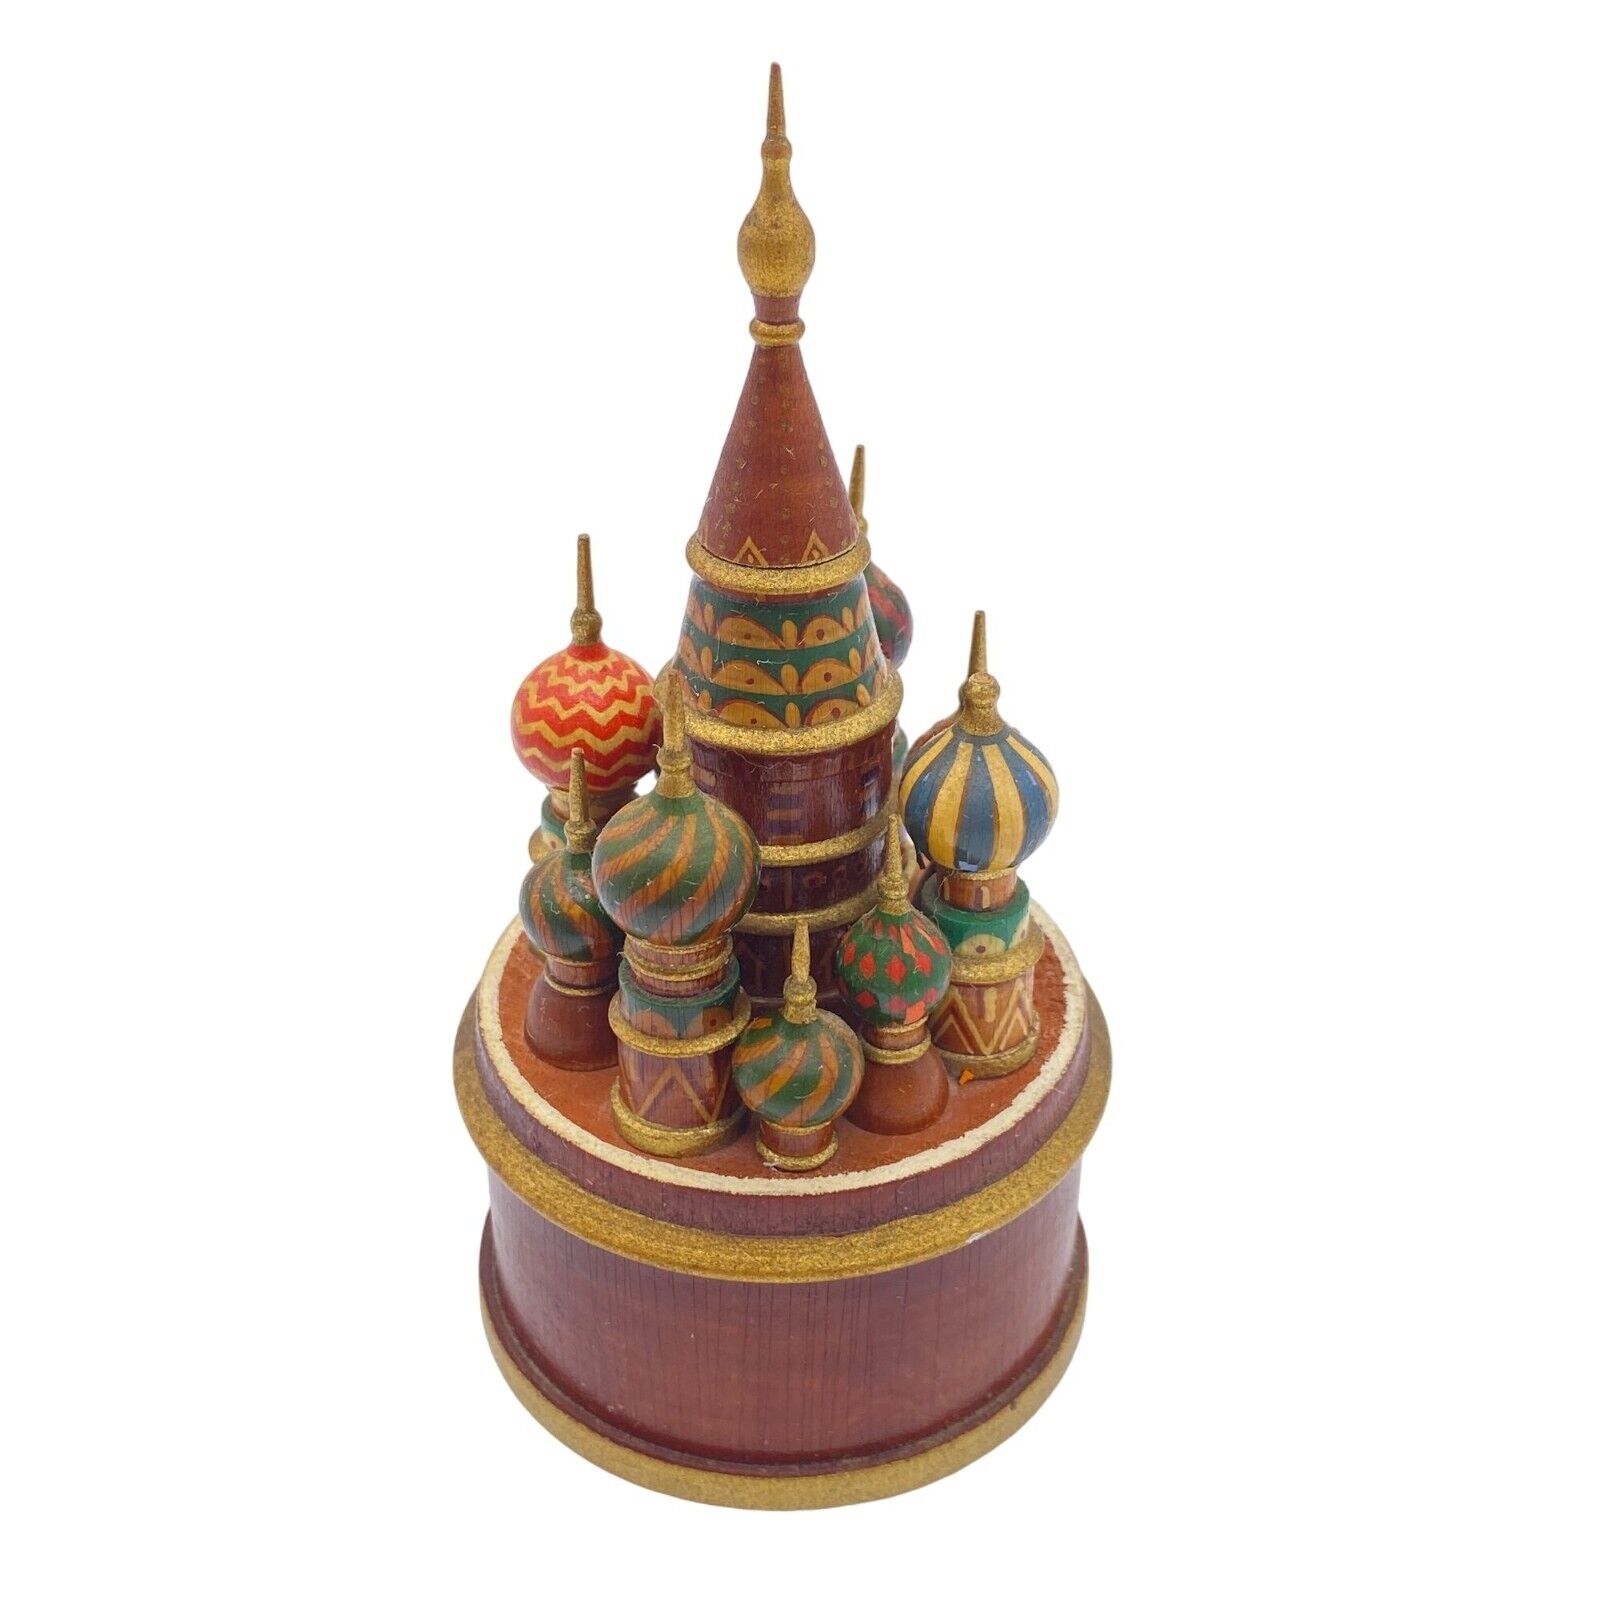 VTG Russian Hand Made Painted Wooden St Basil's Cathedral Figurine Statue Moscow